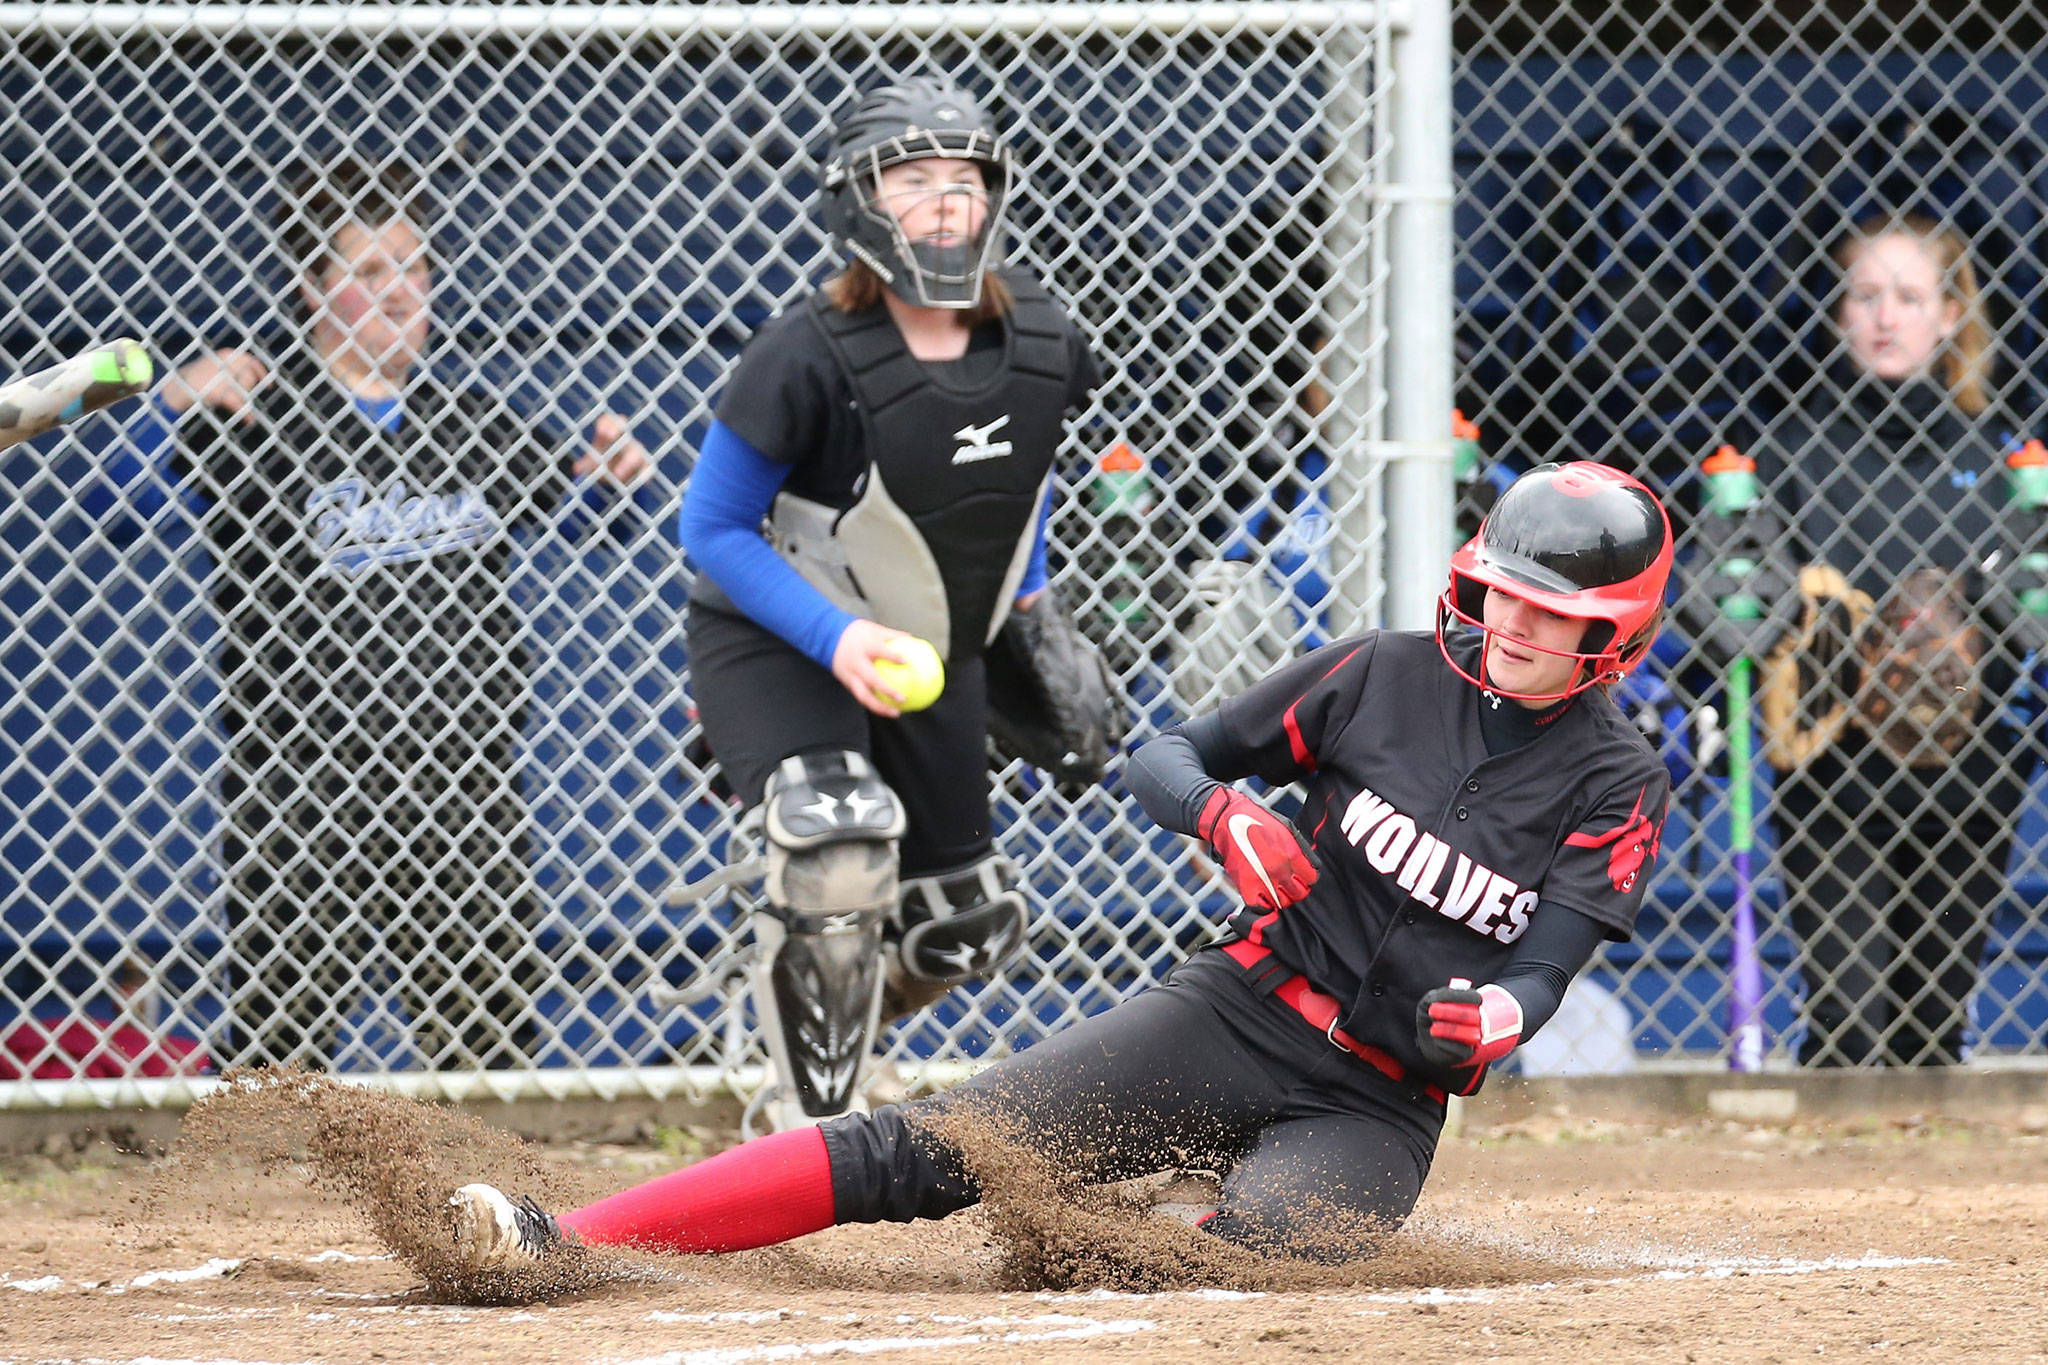 Wolves roll to 12-0 win in opener / Softball